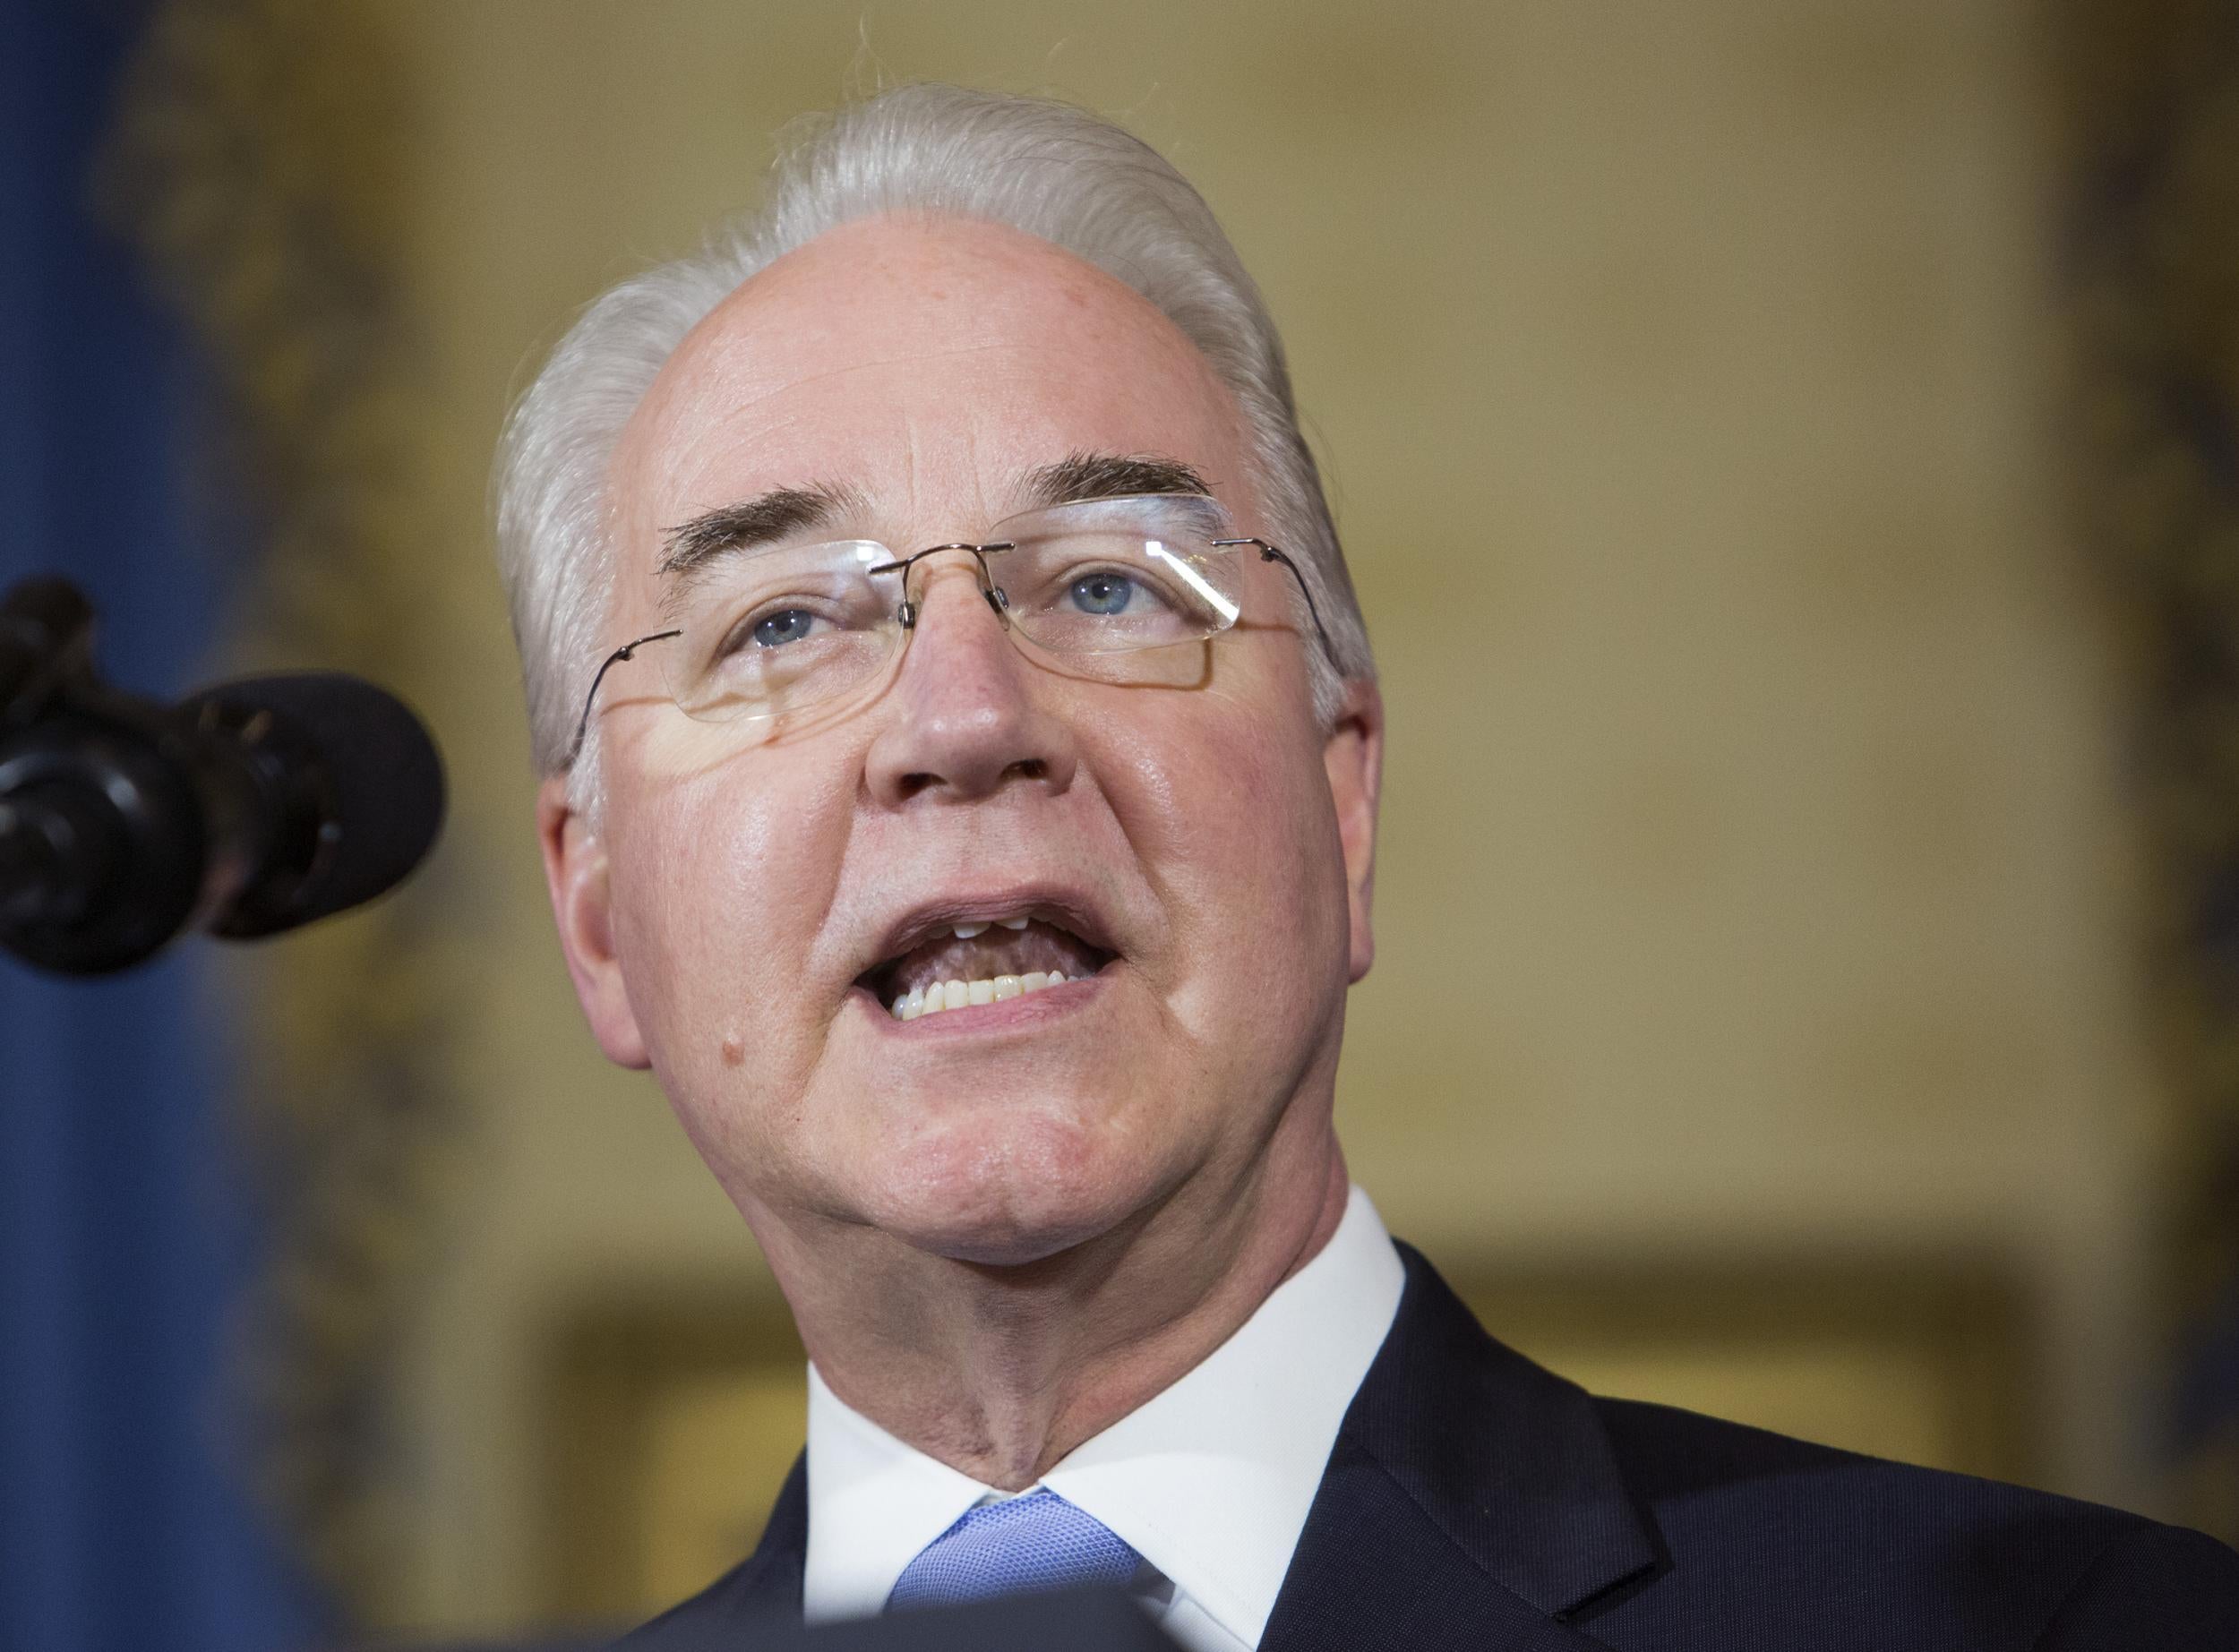 HHS Secretary Tom Price makes a statement on health care at The White House